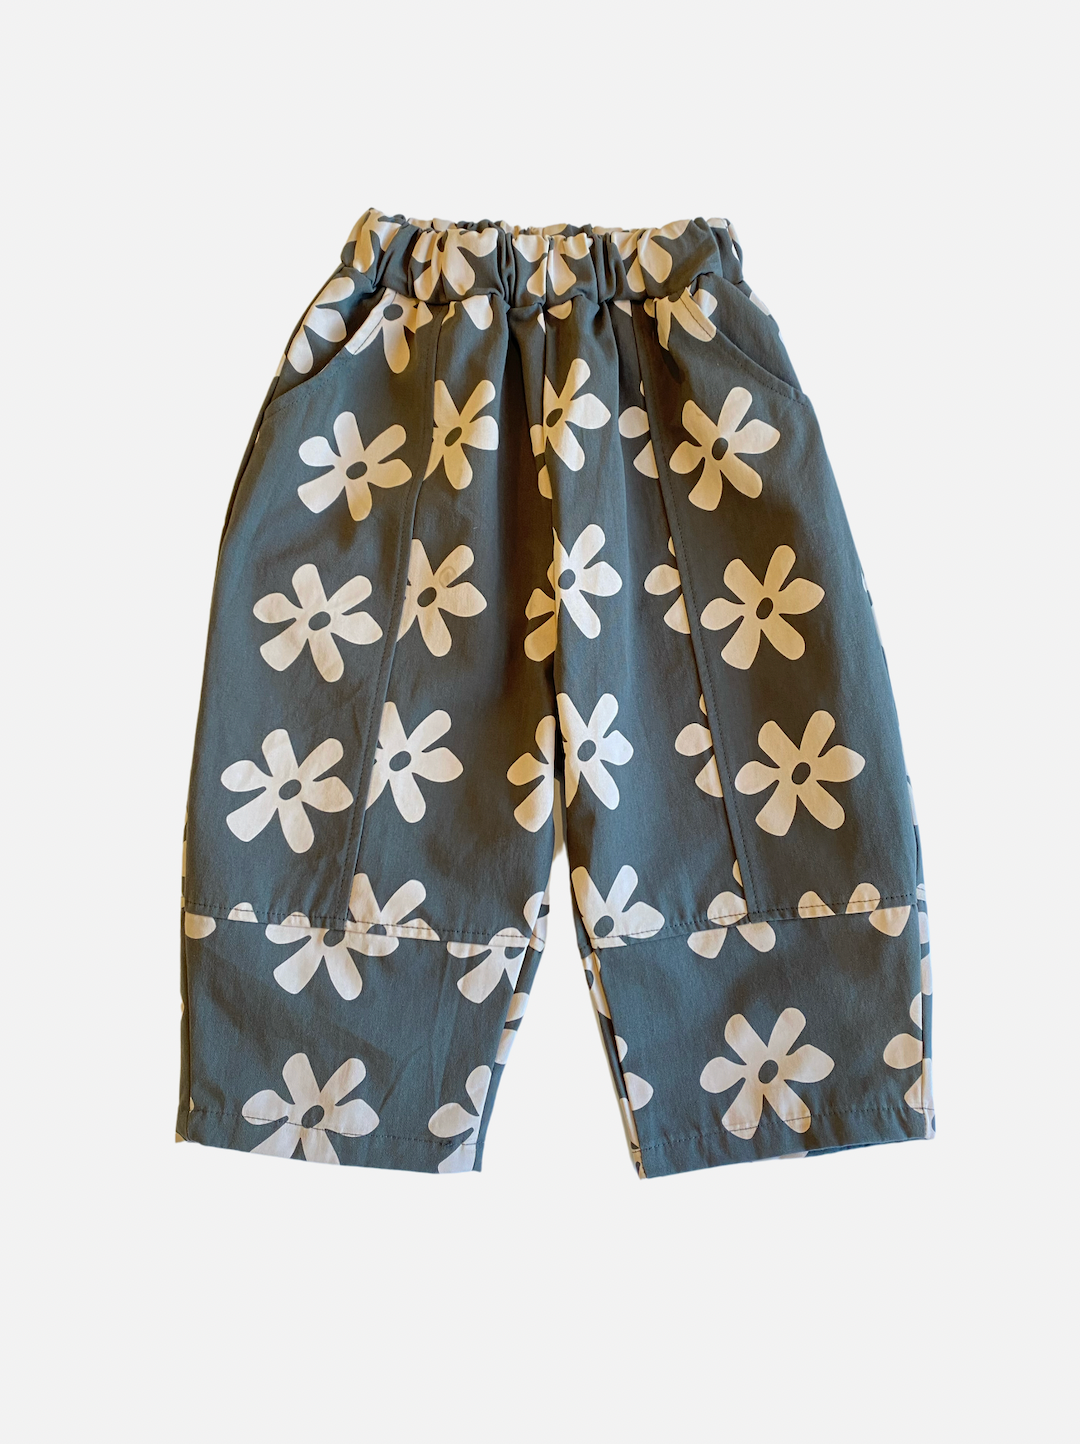 Black | A pair of kids' pants in gray with cream flowers